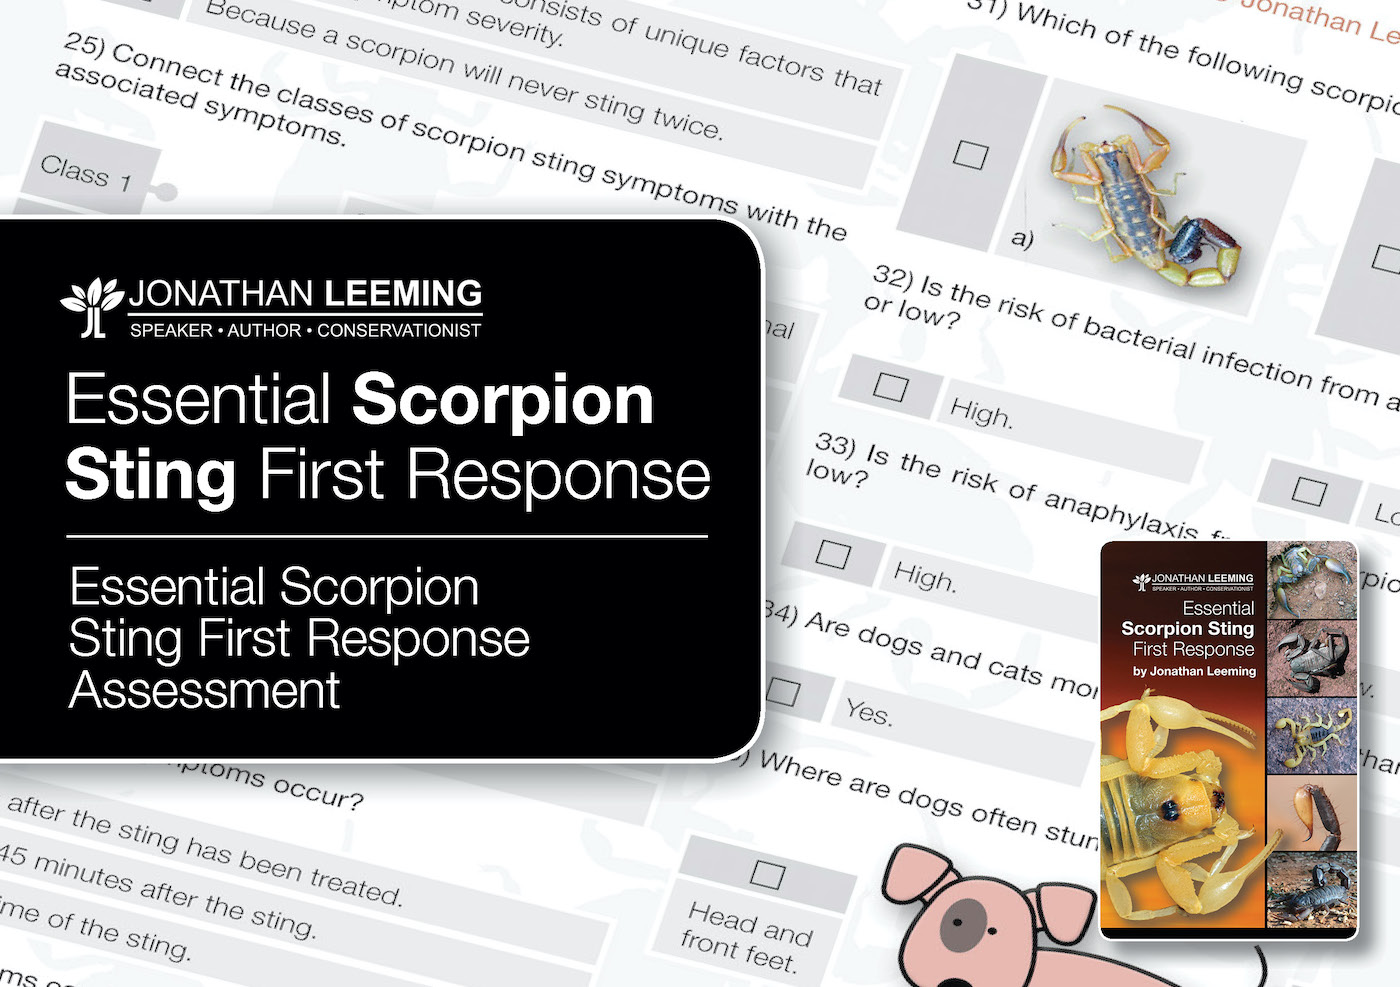 Scorpion sting first response course assessment